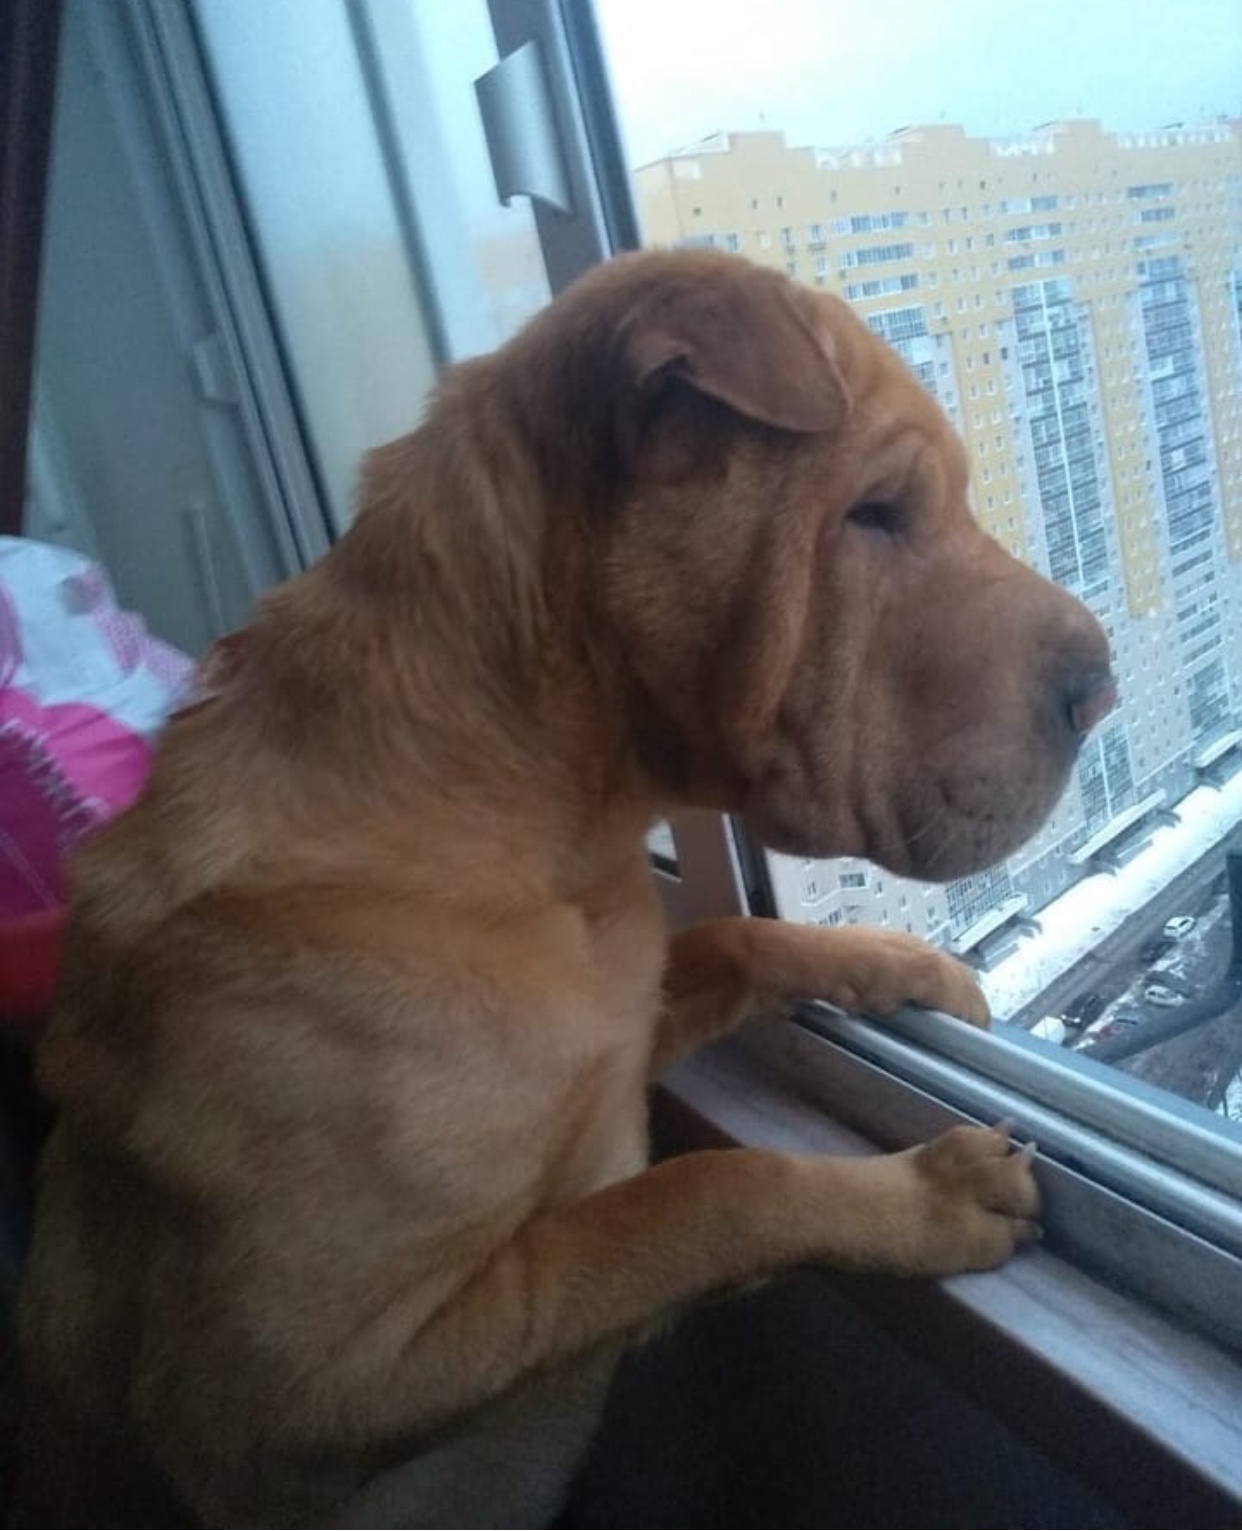 A Shar-Pei leaning towards the window while looking outside